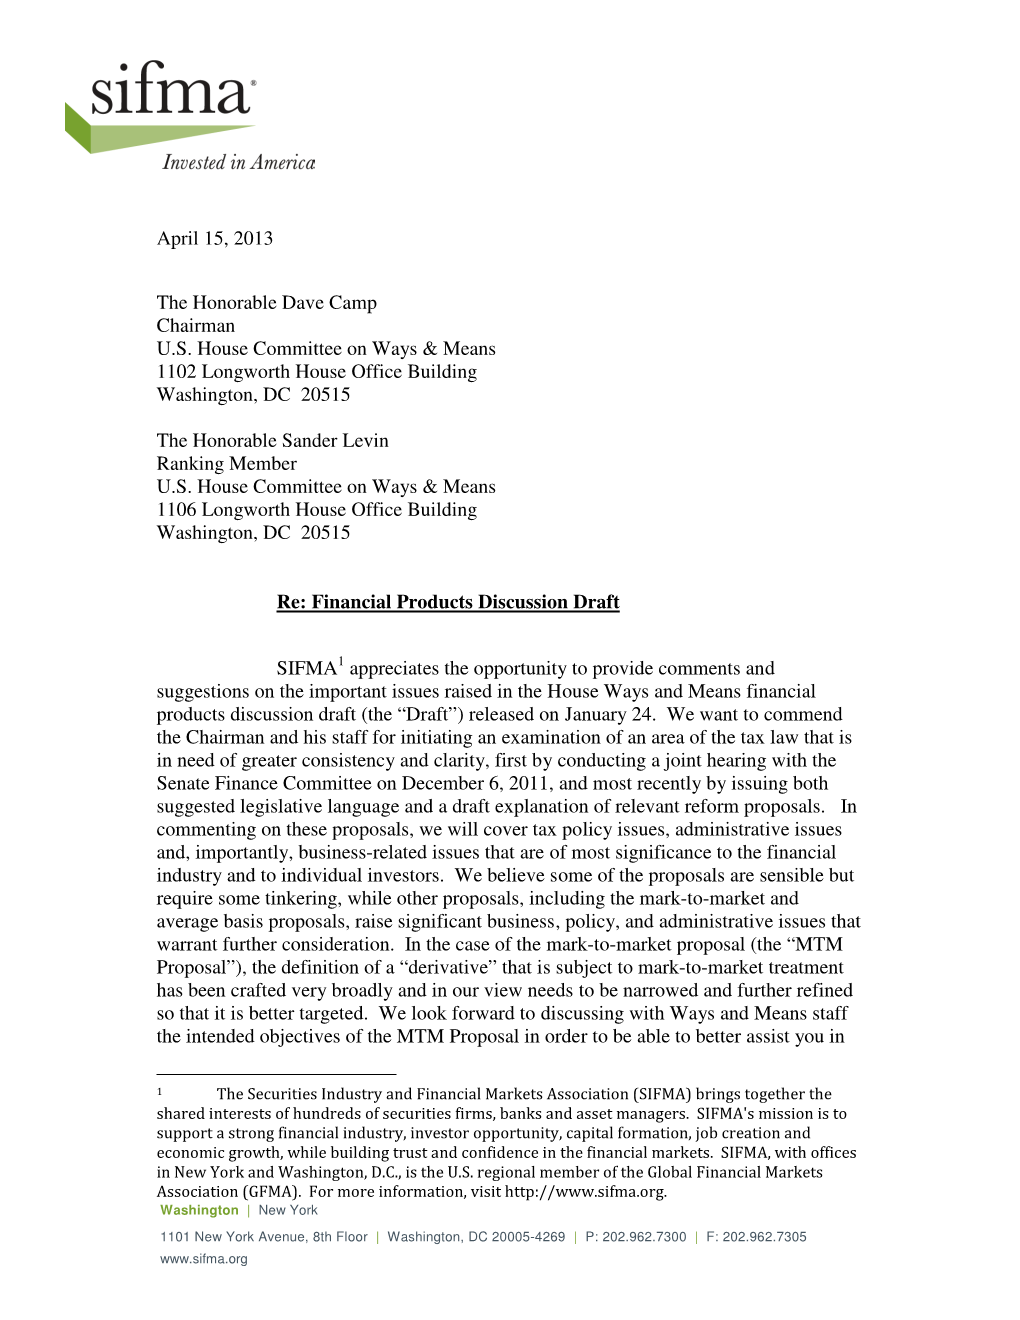 SIFMA Submits Comments to the US House Ways and Means Committee on the Committee's Financial Products Discussion Draft